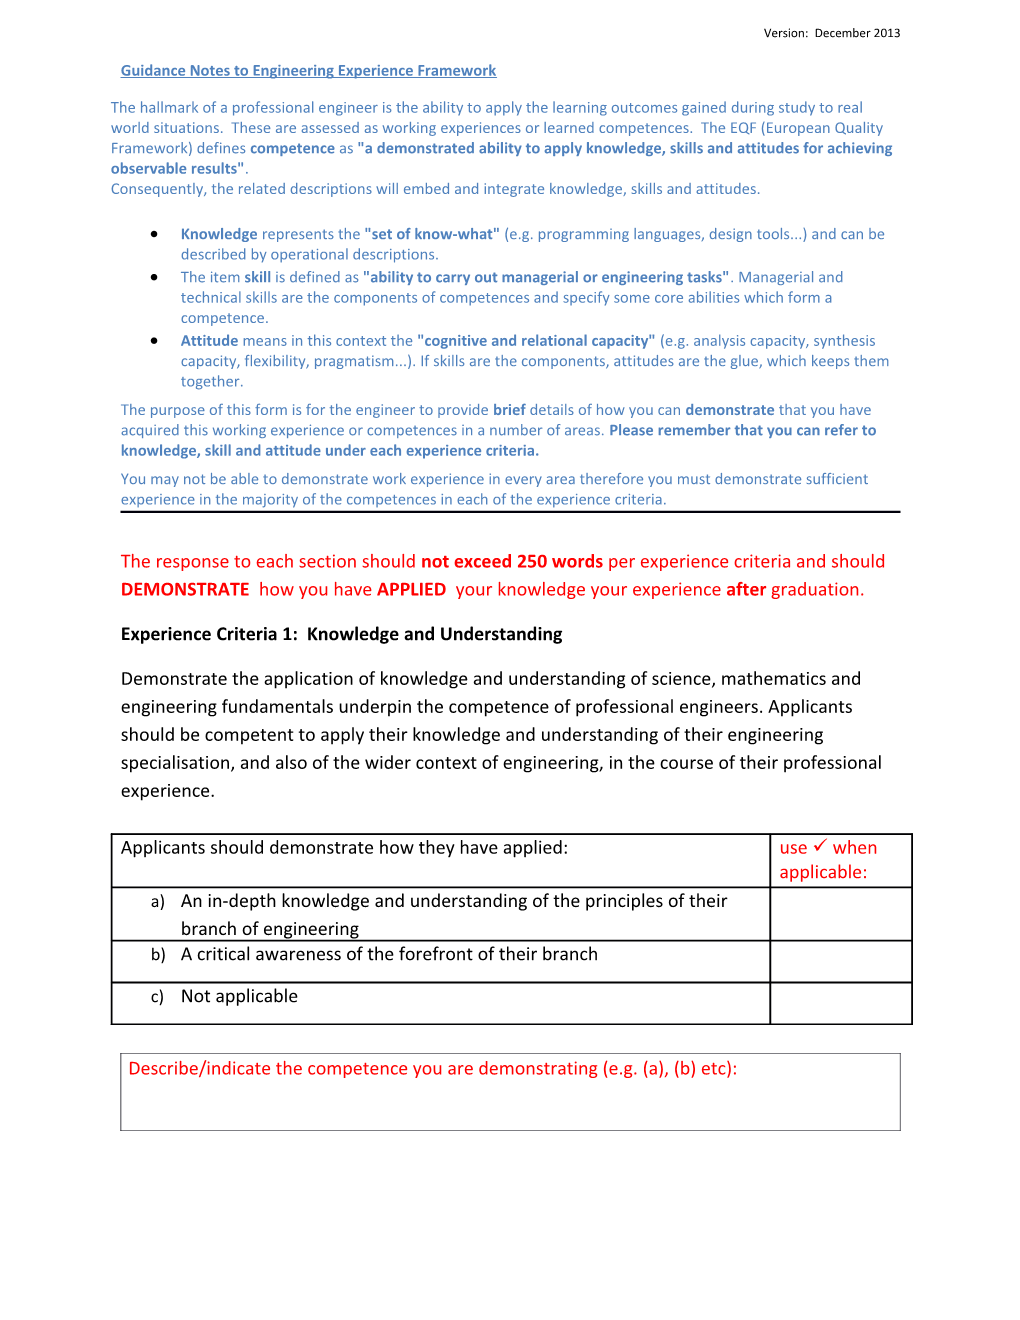 Guidance Notes to Engineering Experience Framework